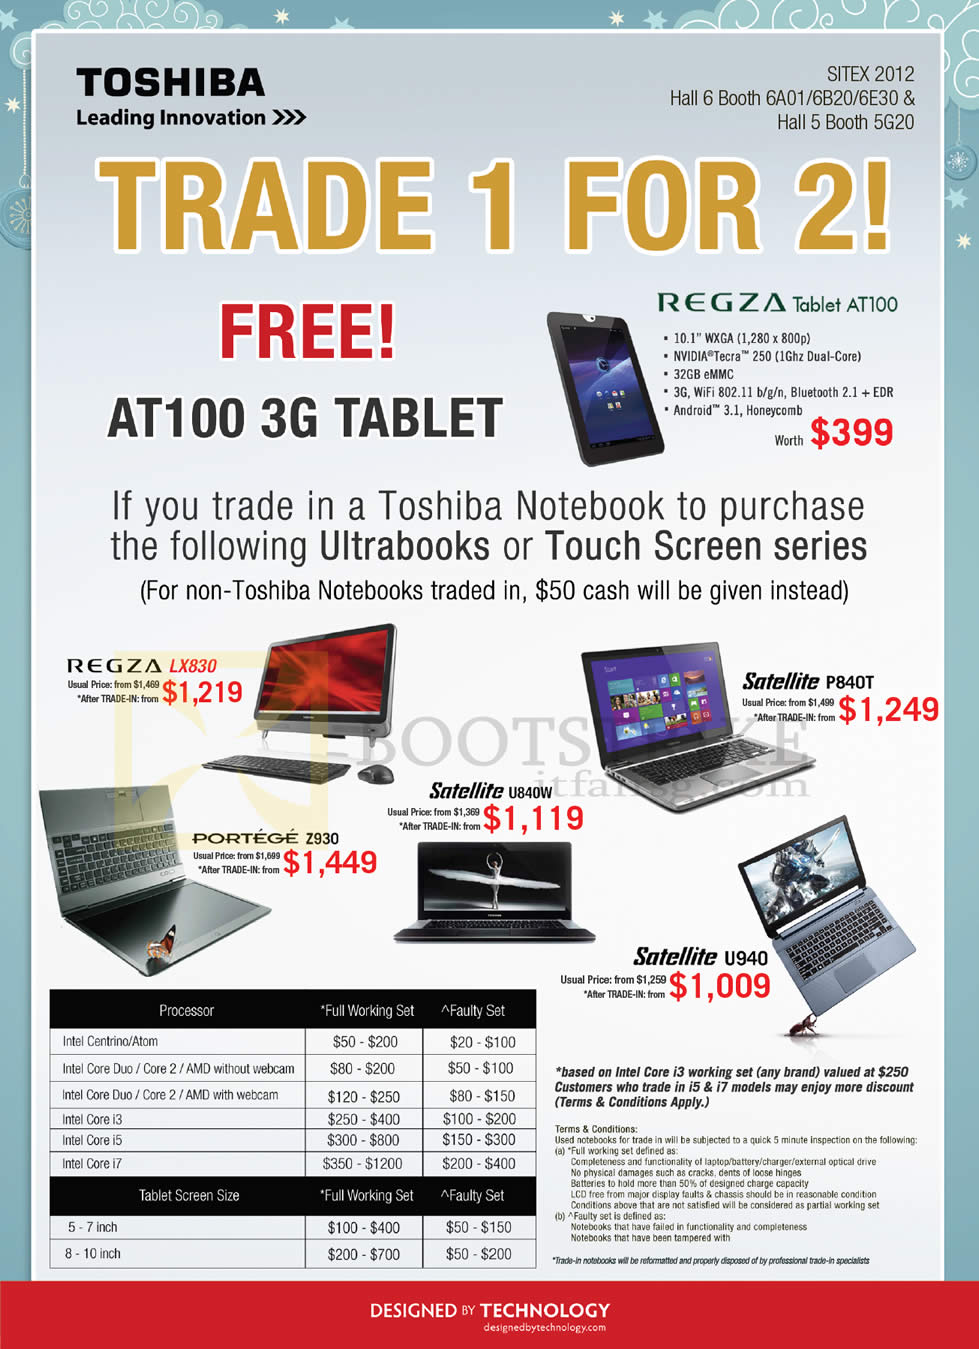 SITEX 2012 price list image brochure of Toshiba Notebooks Trade In 1 For 2